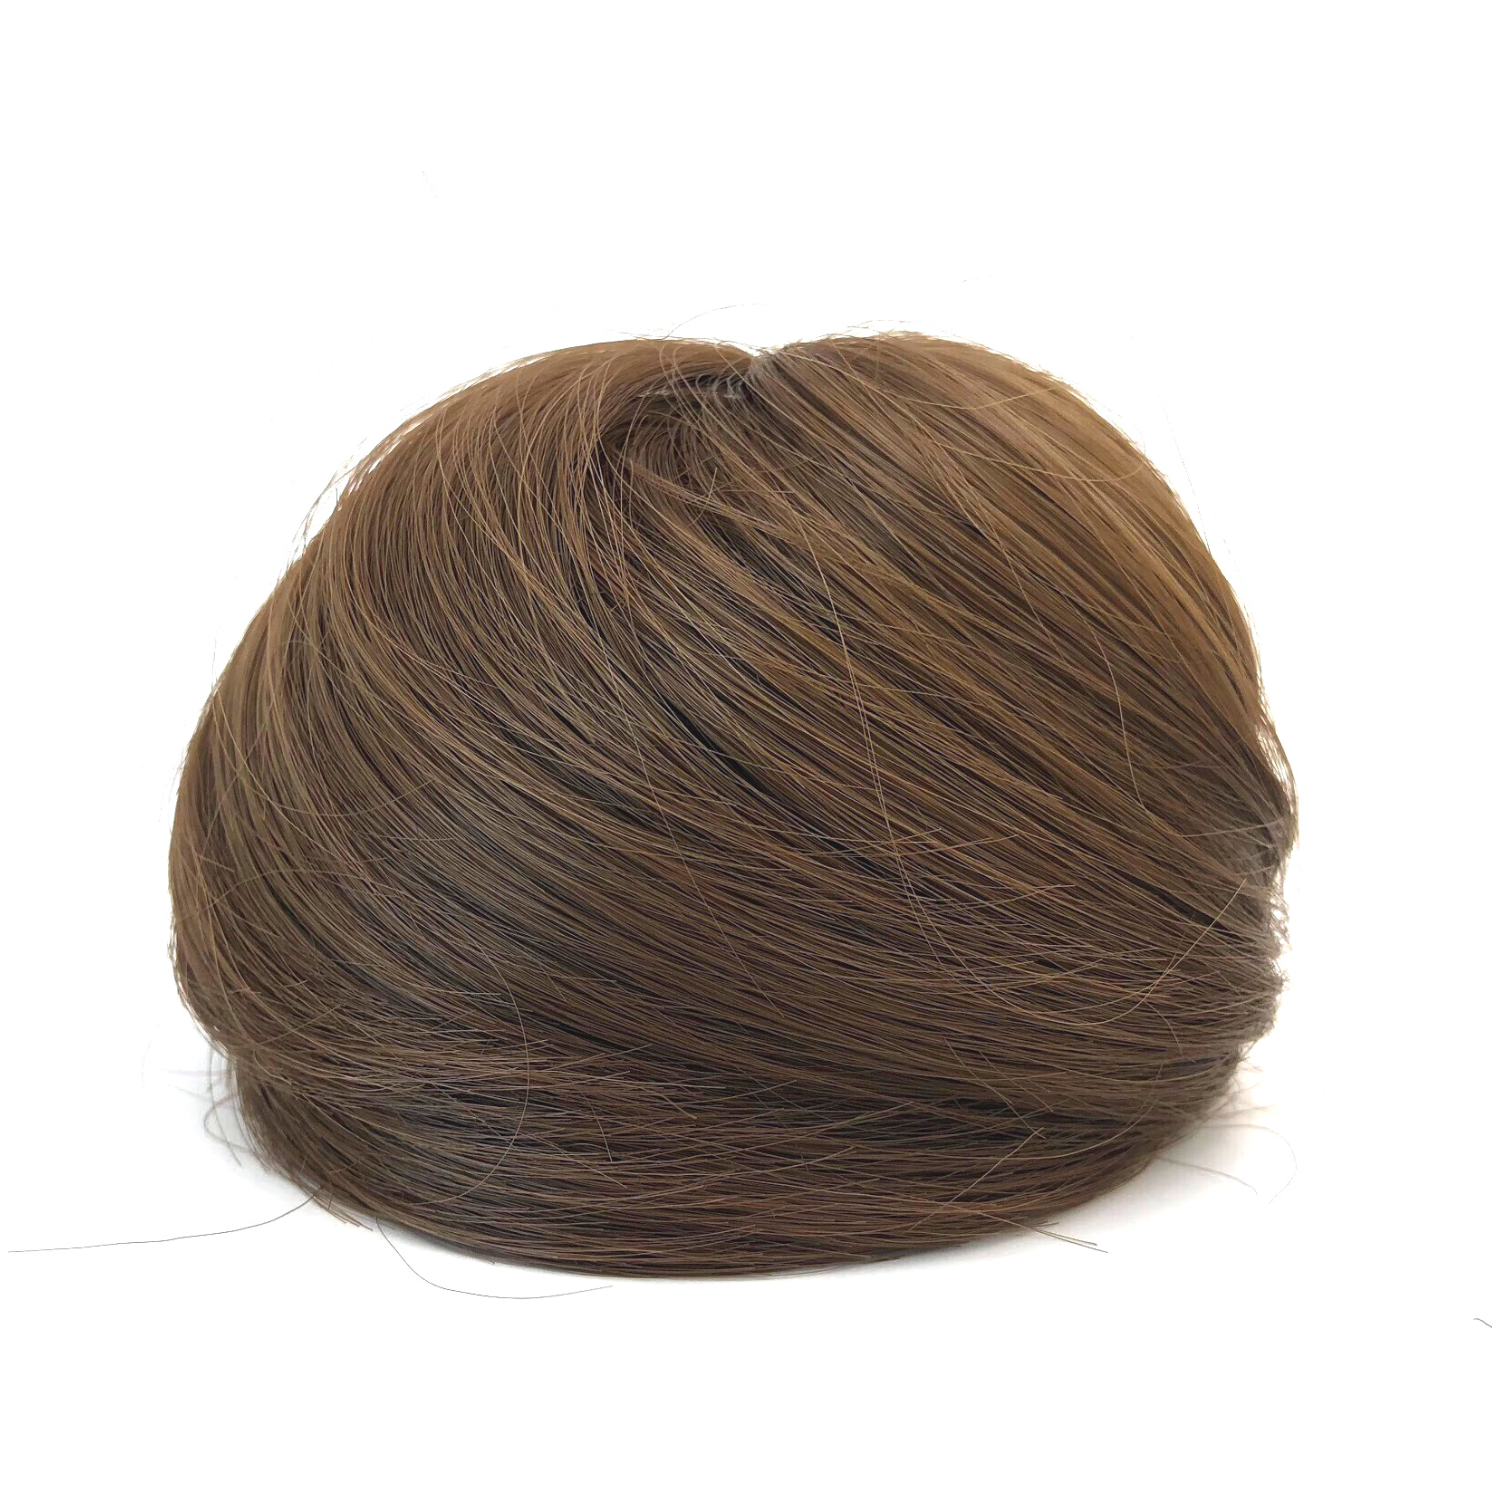 image of hair rehab london clip on bun hairpiece in shade cocoa